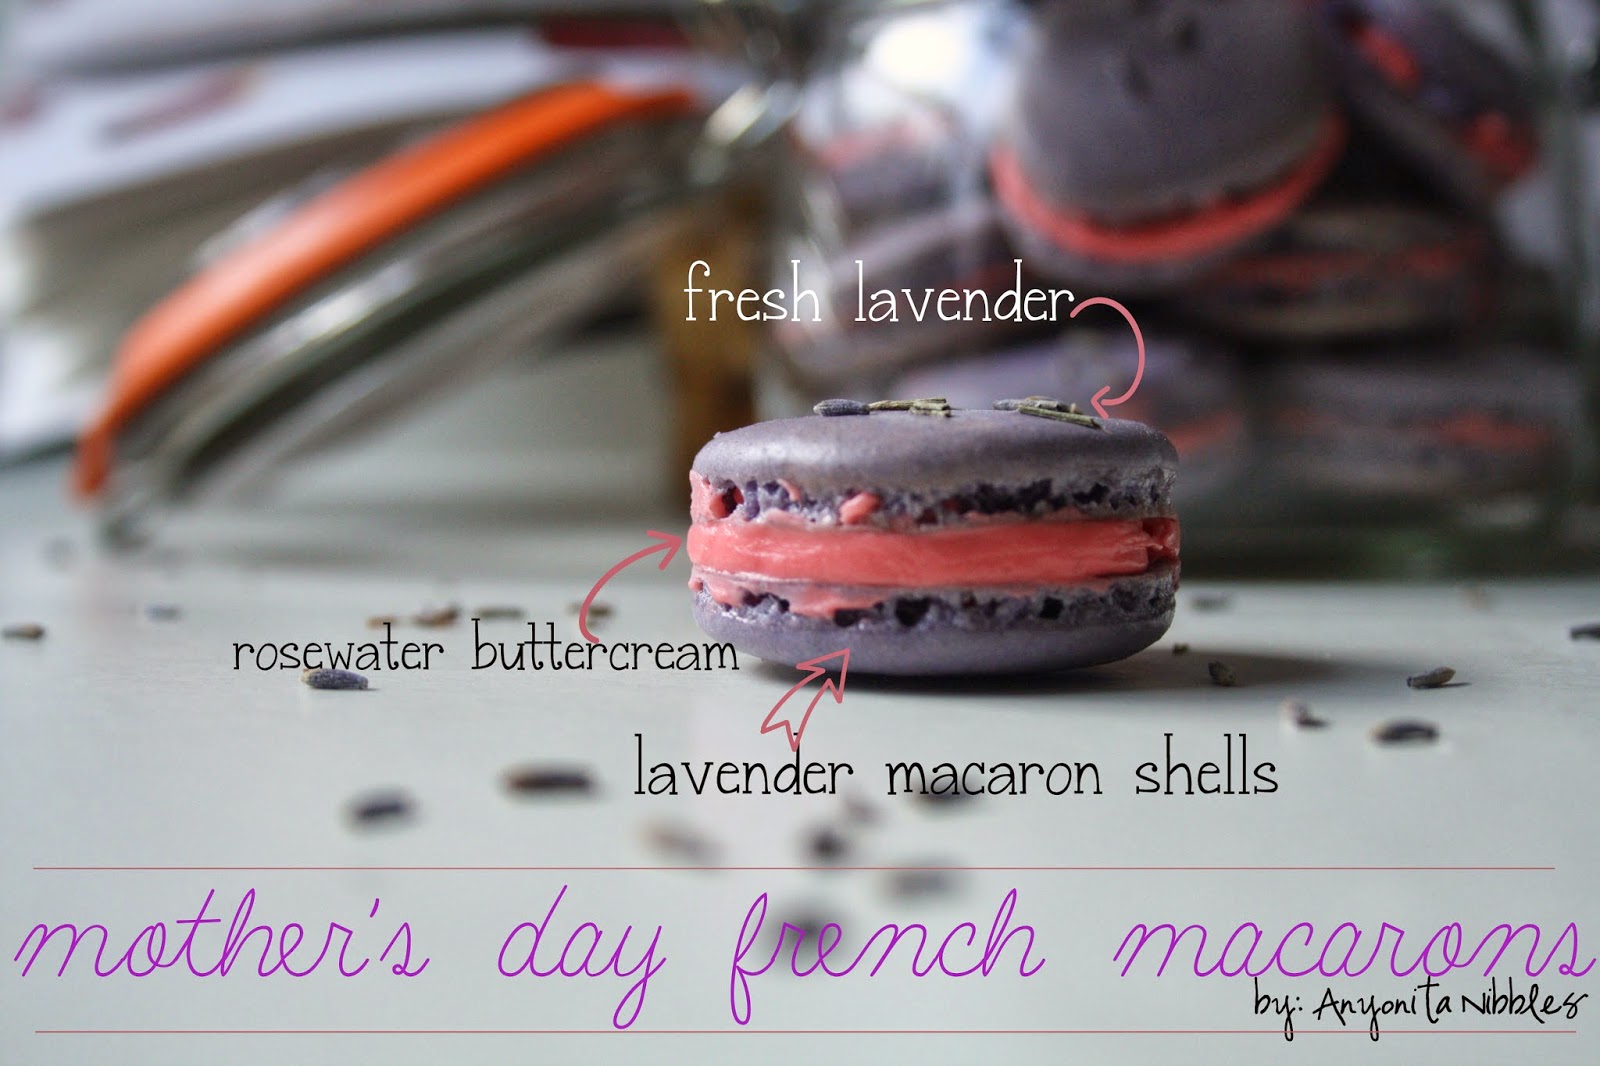 Components of a lavender and rose French macaron from @anyonita